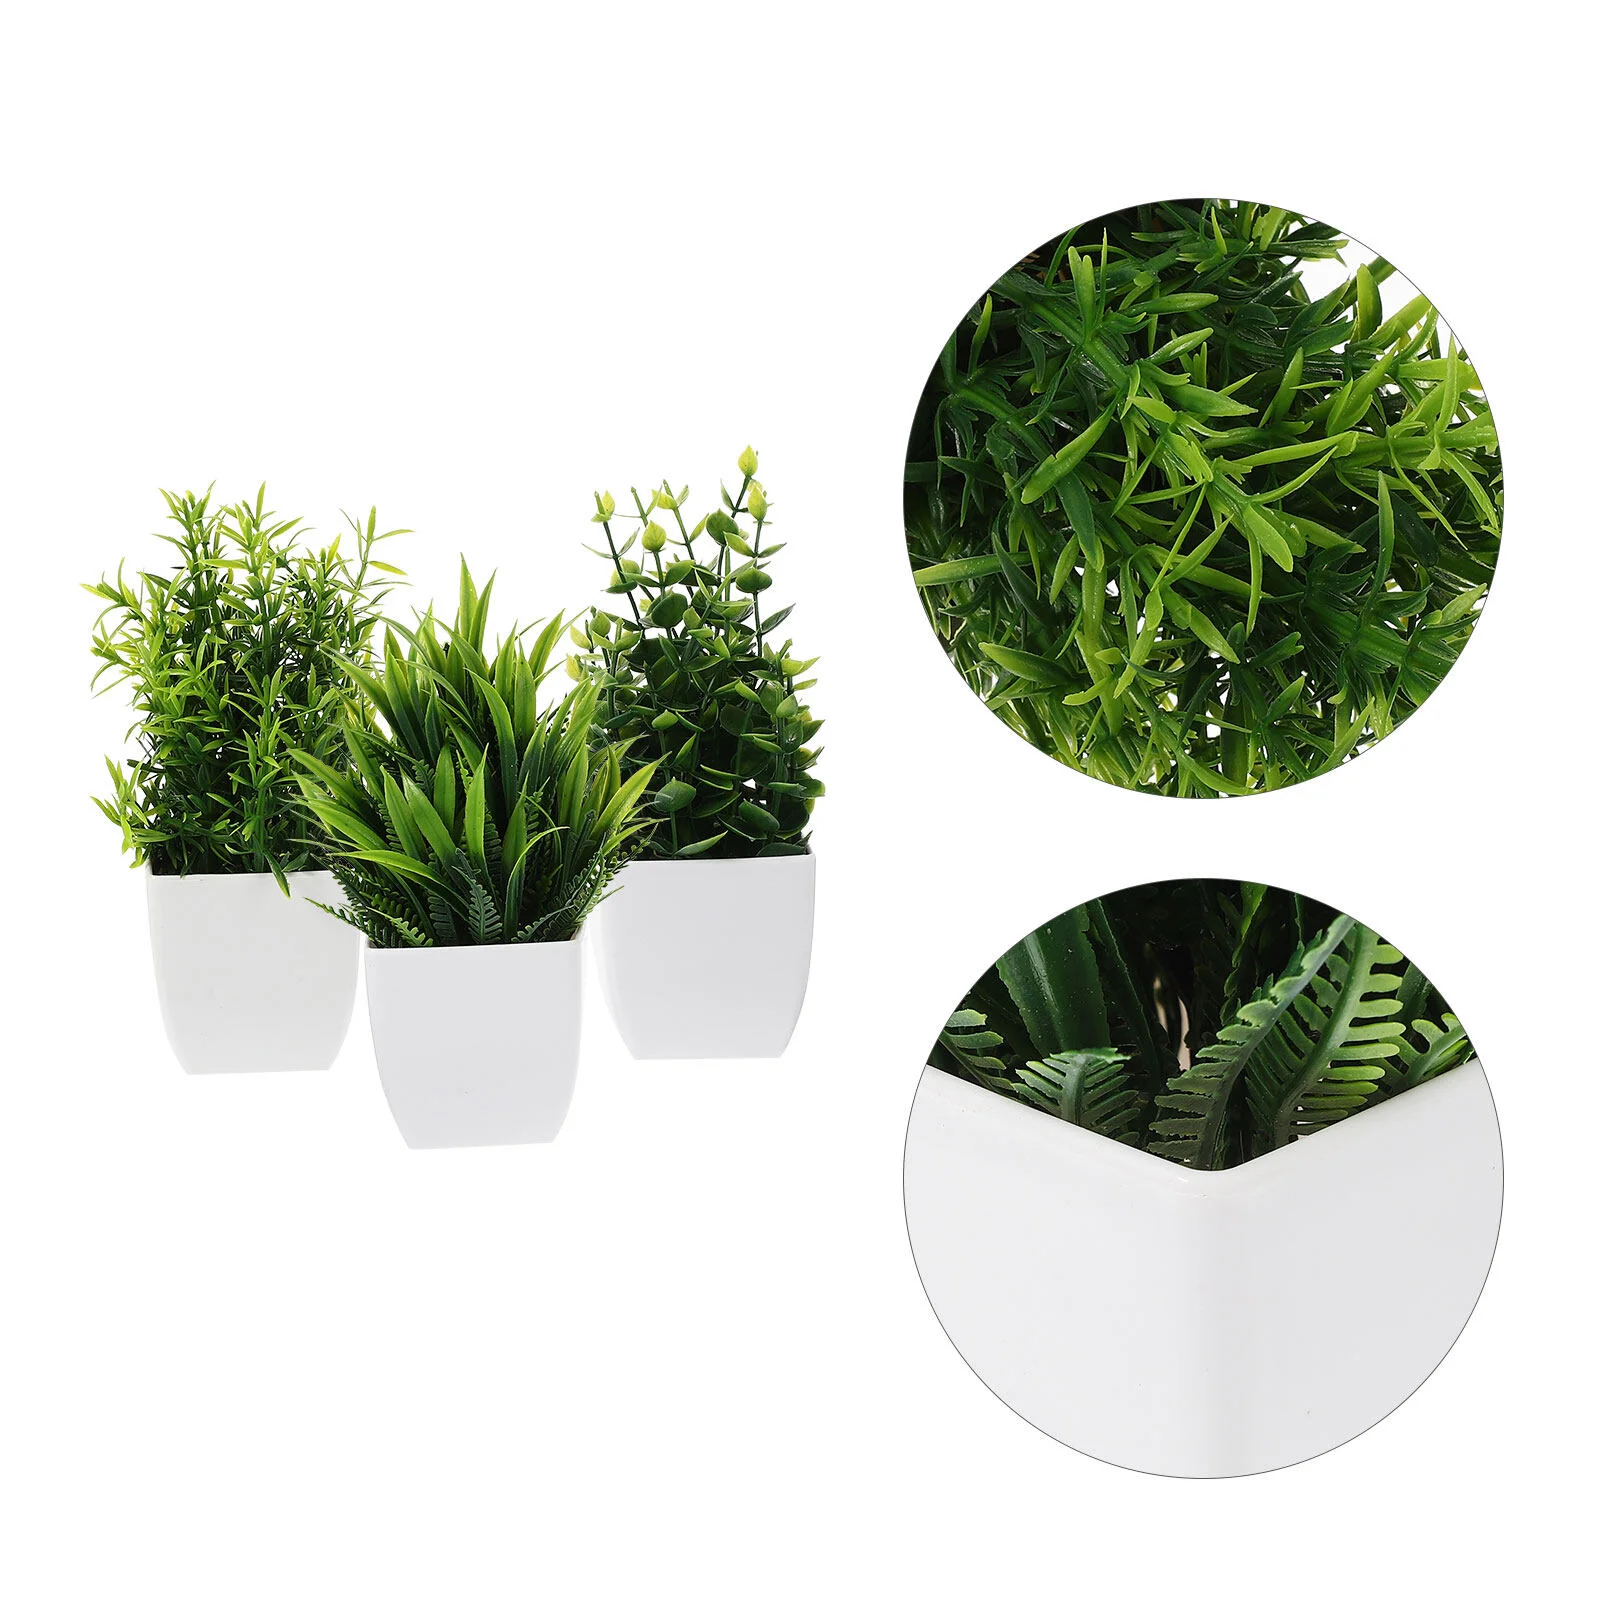 

3 Pcs Simulated Potted Artificial Plants Indoor Fake Desk Desktop Adornments Bonsai Small Green Decors Pp Office Home